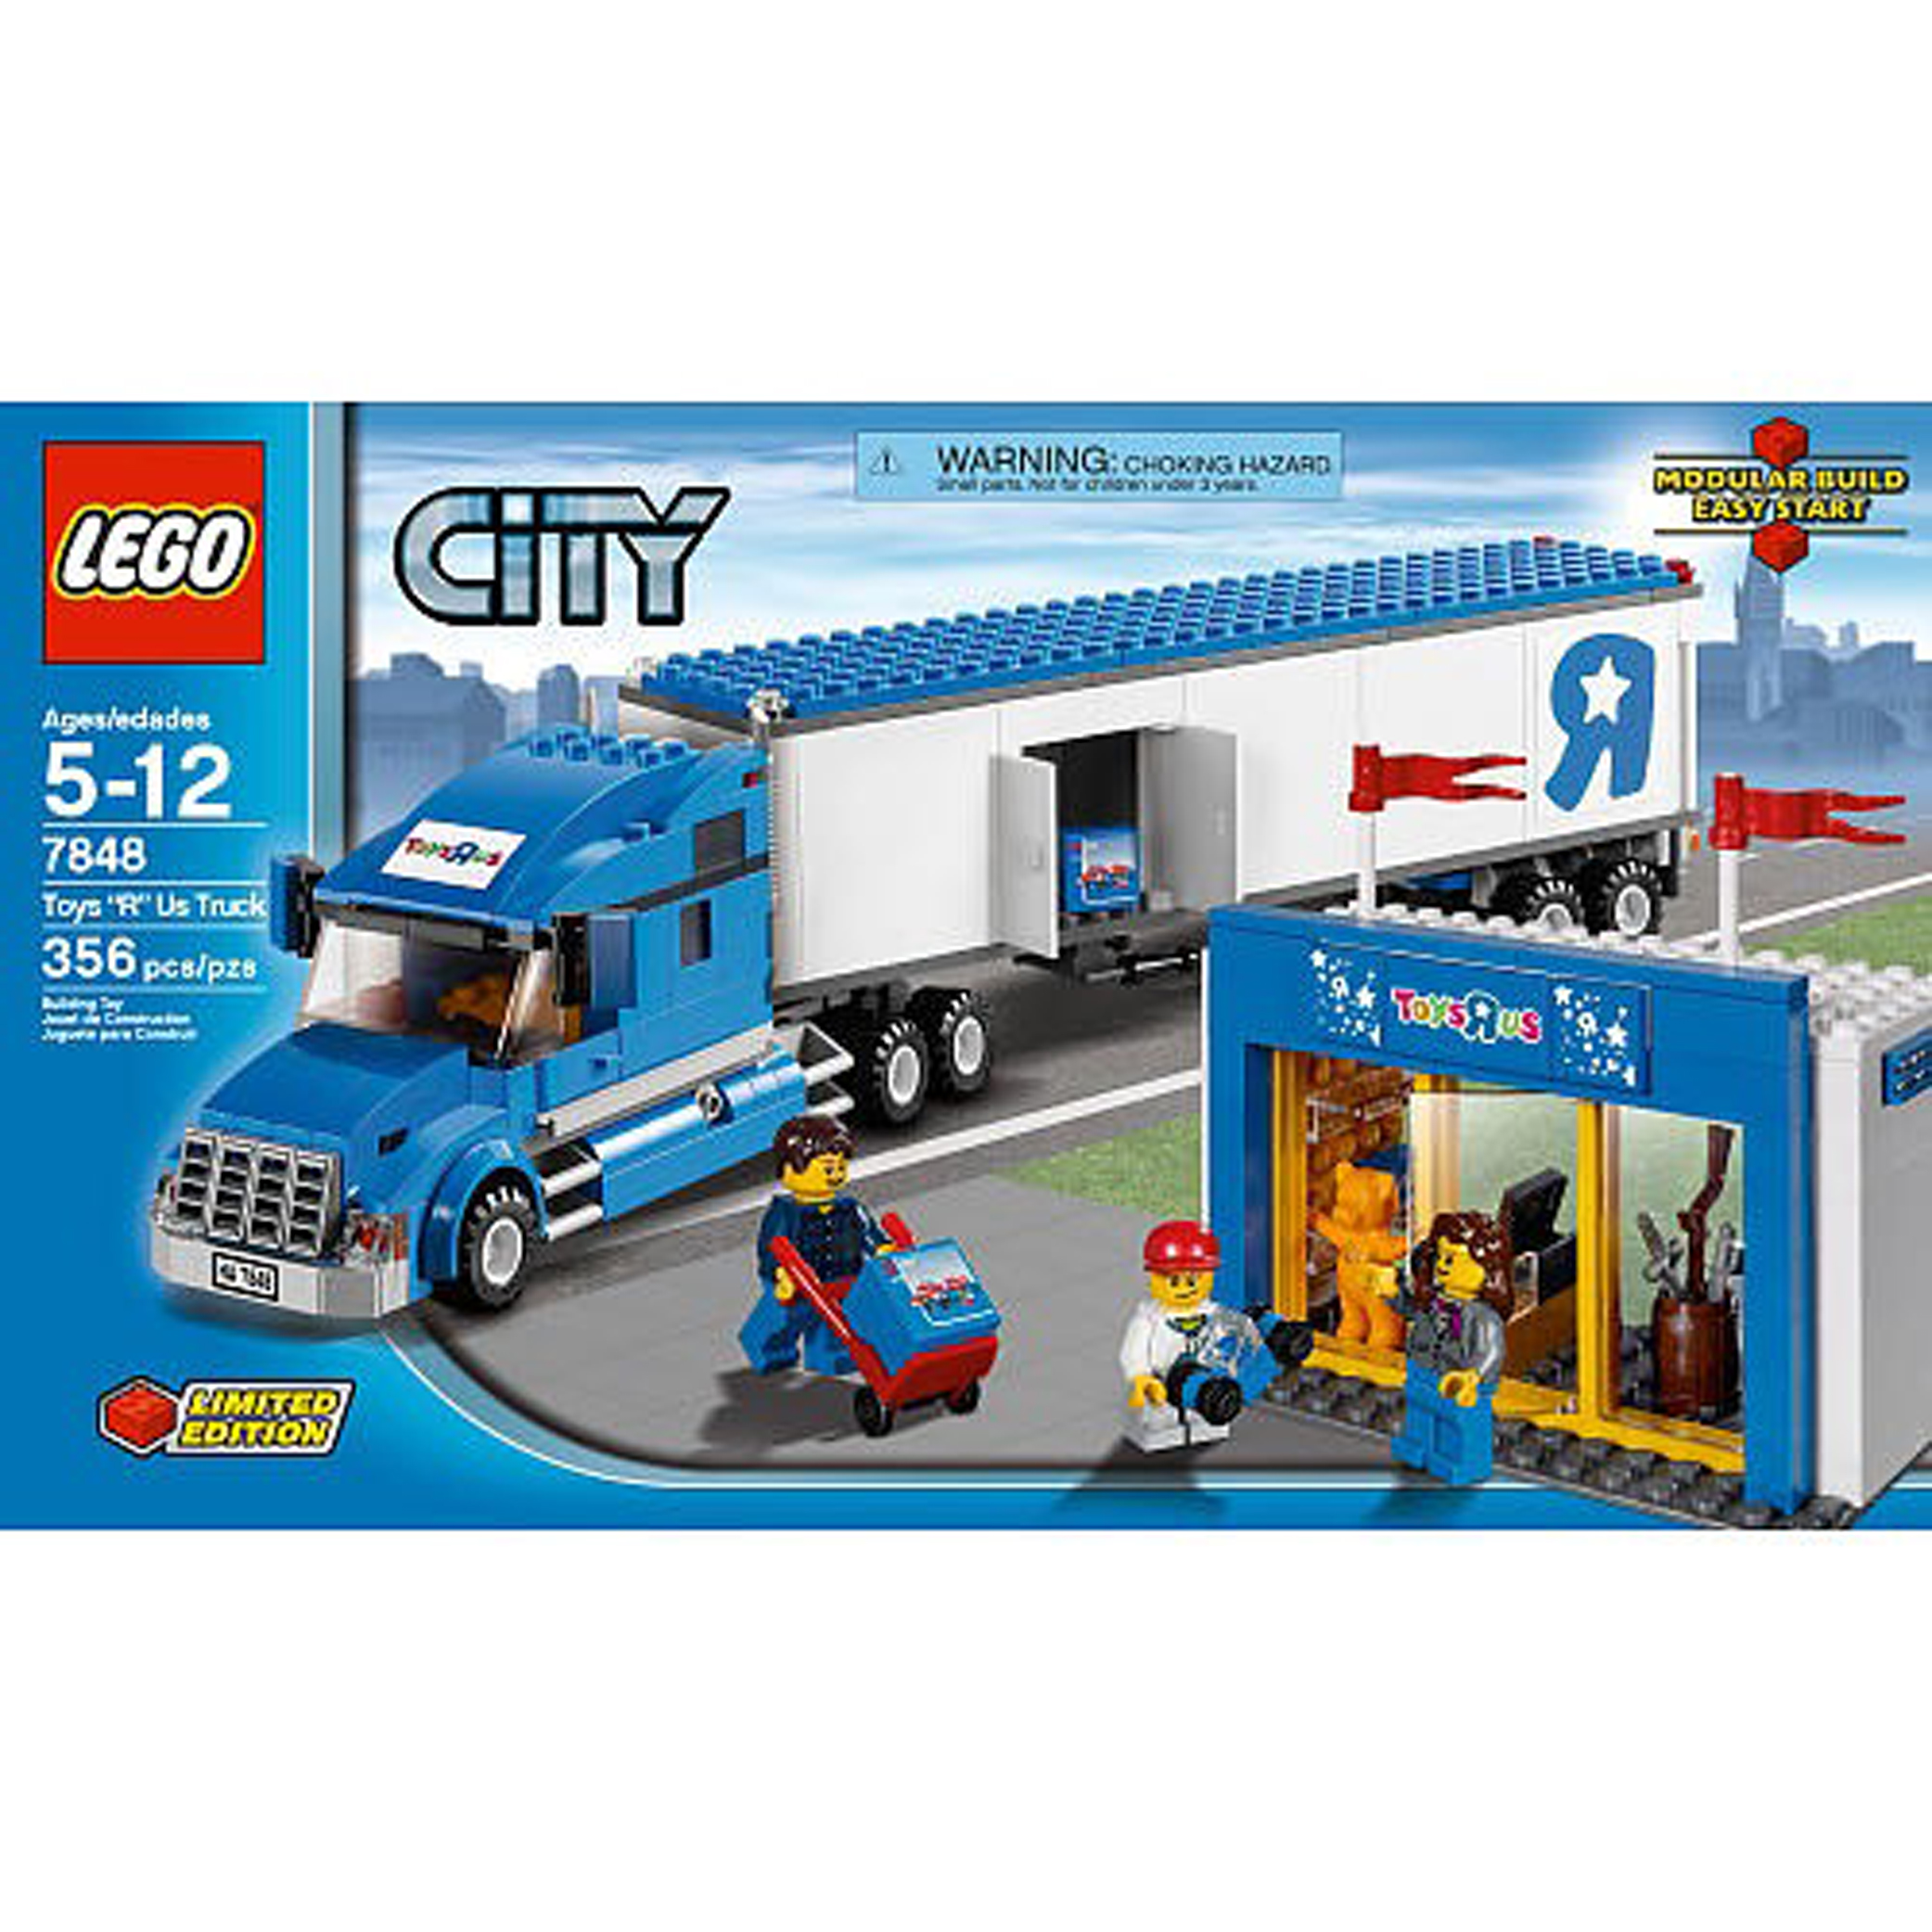 LEGO City Toys R Us (7848) Review